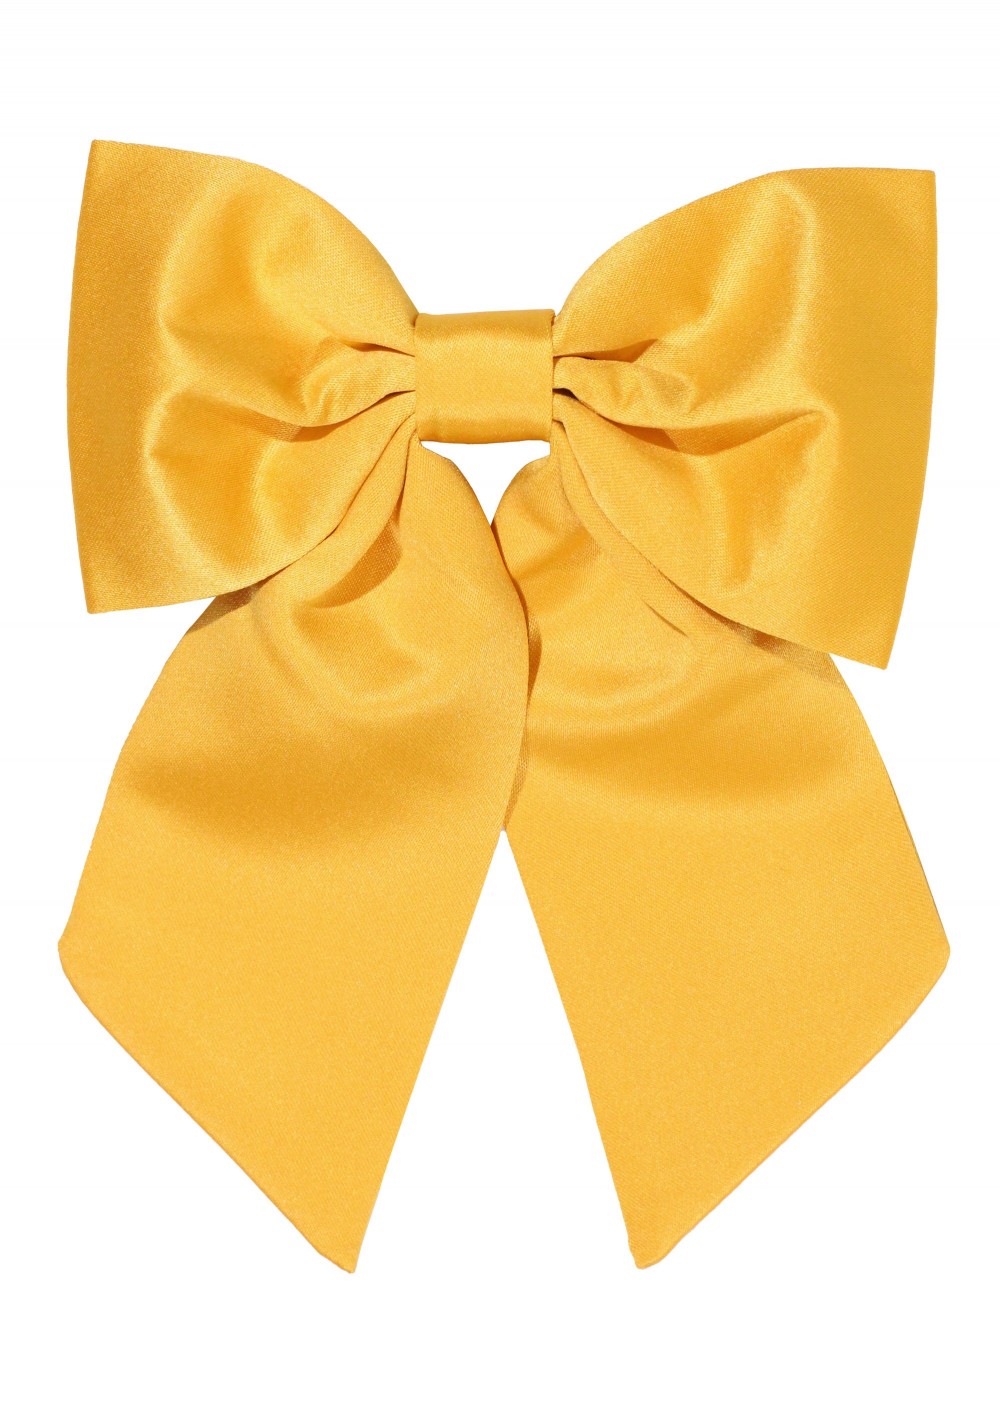 Amber Gold Hair Bow | Hair Bow Clip in Solid Amber Gold | Bows-N-Ties.com